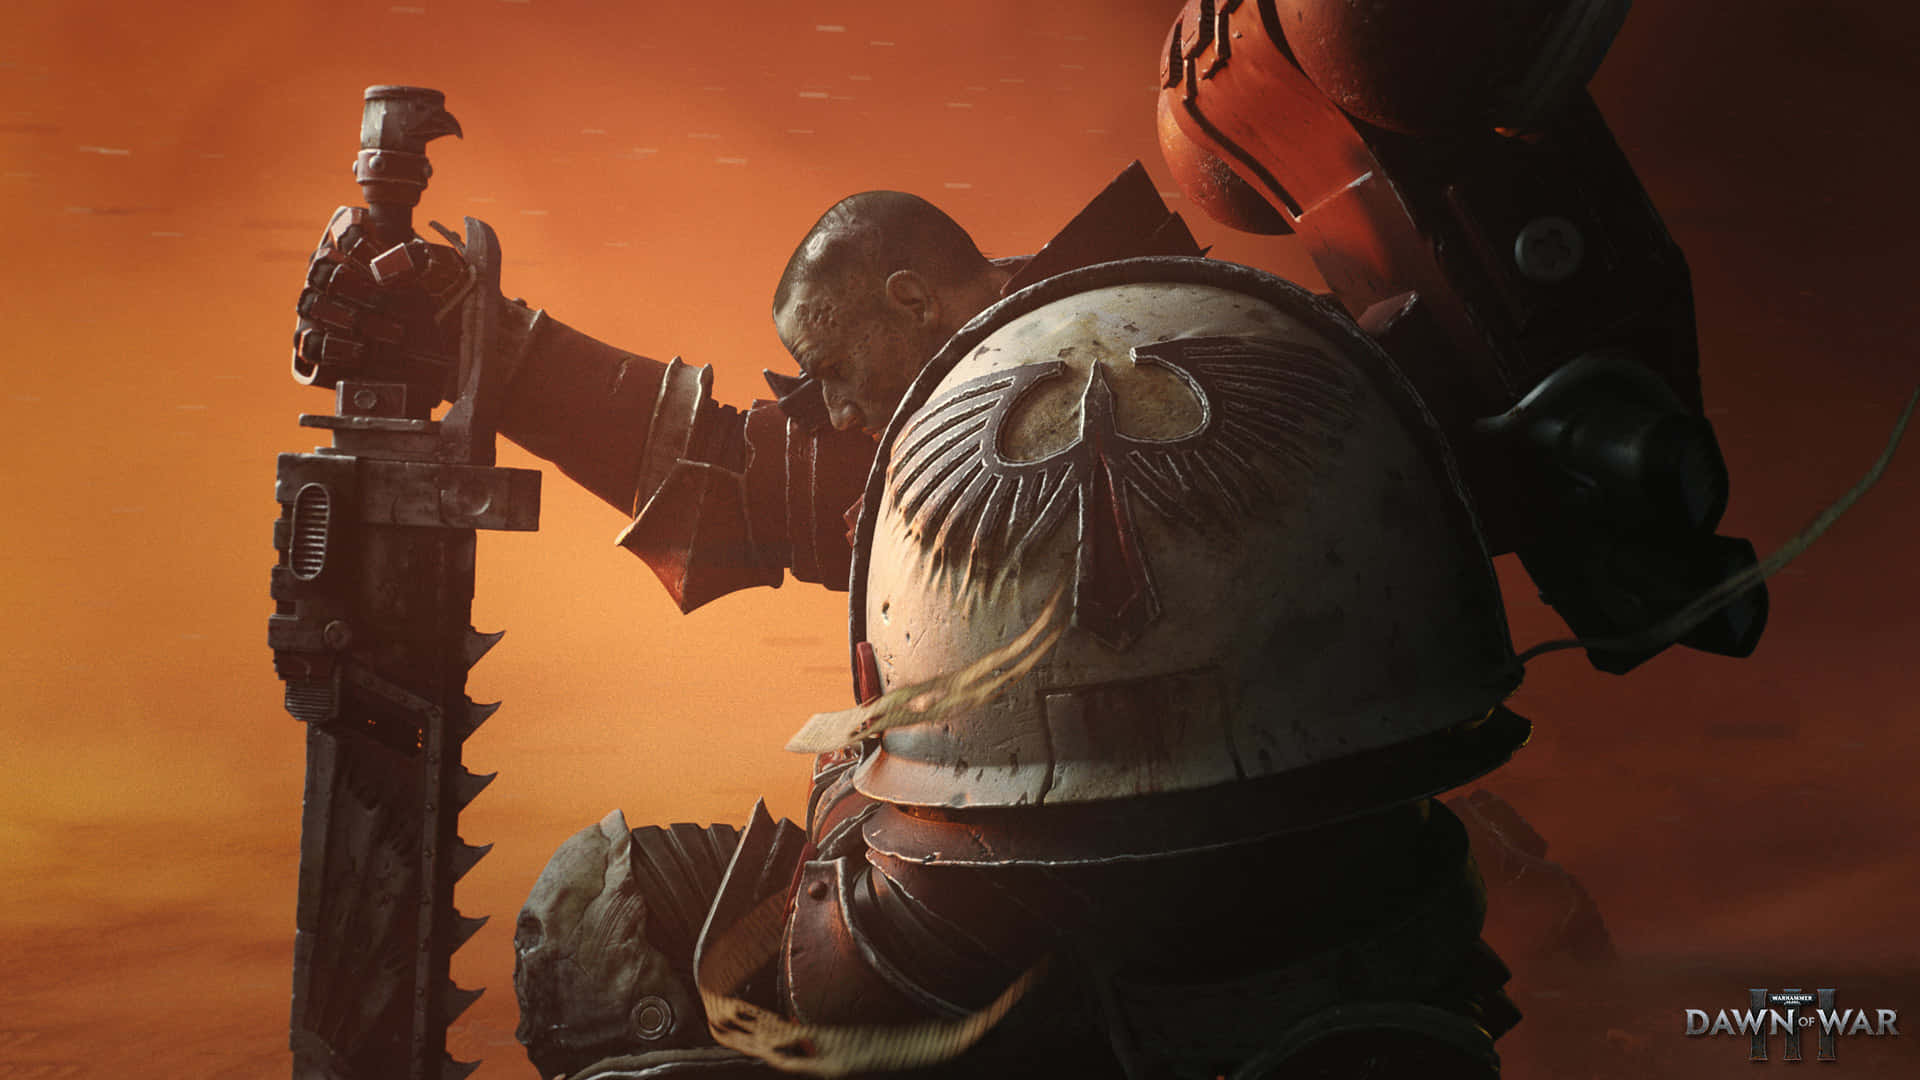 Best Dawn of War III - RTS Game of Epic Proportions